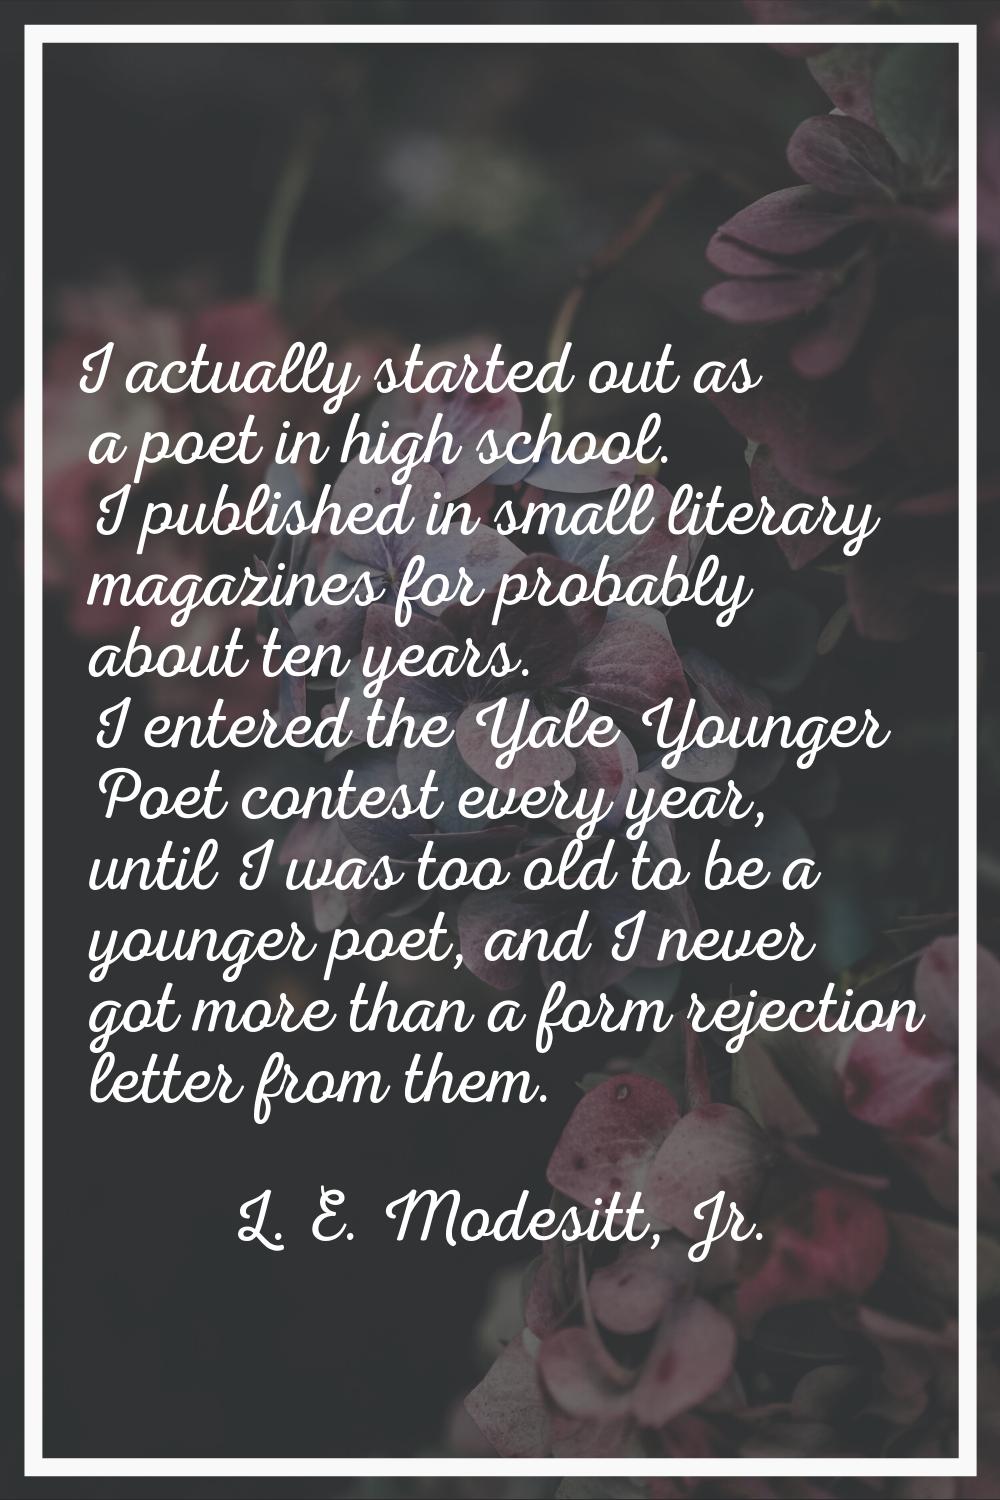 I actually started out as a poet in high school. I published in small literary magazines for probab